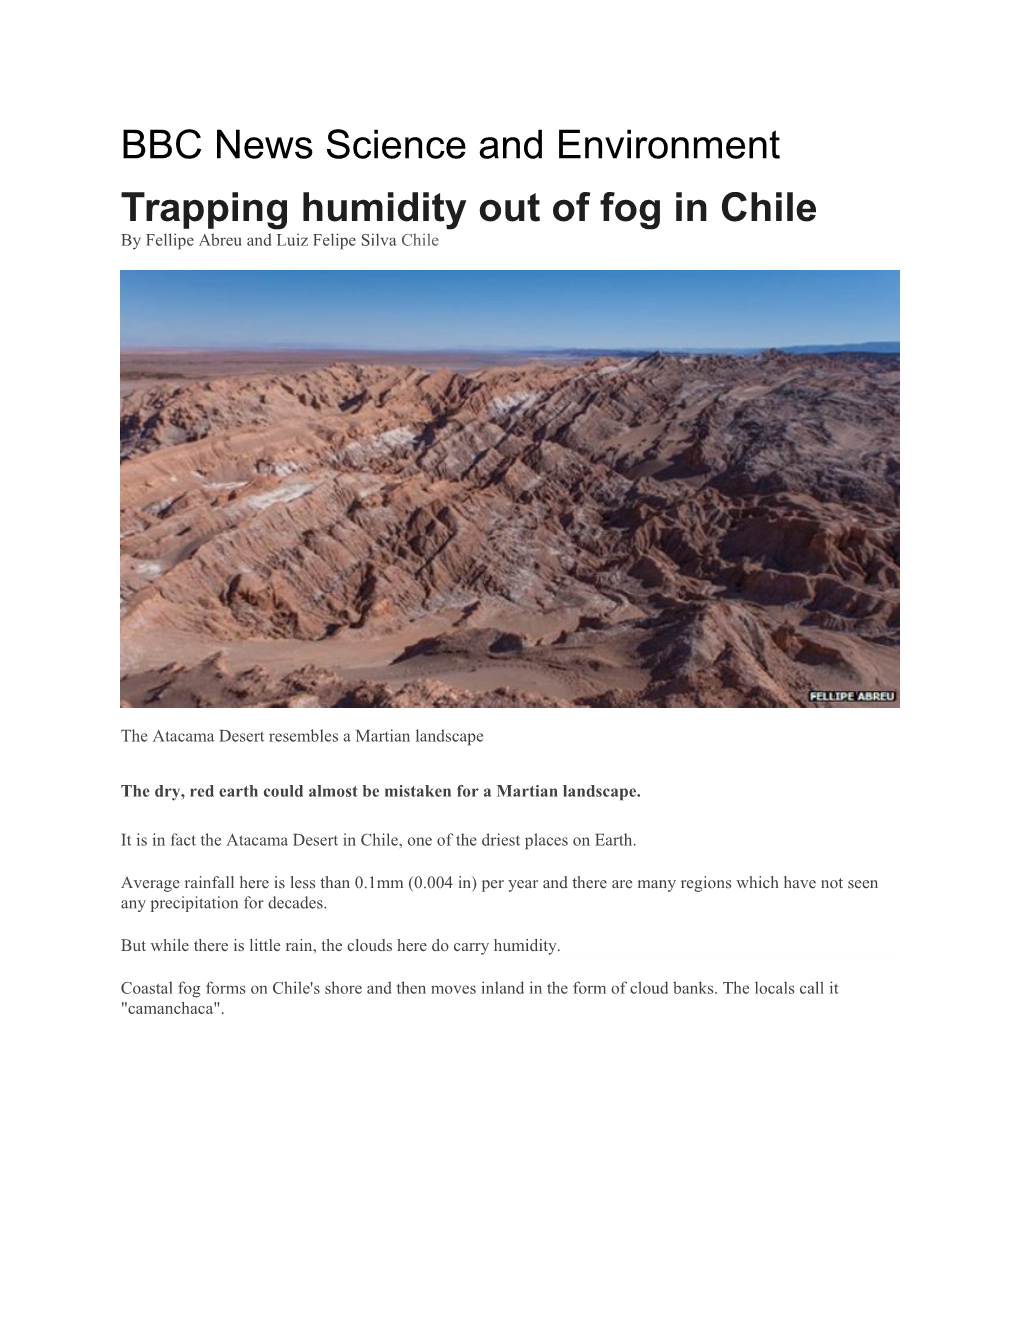 Trapping Humidity out of Fog in Chile